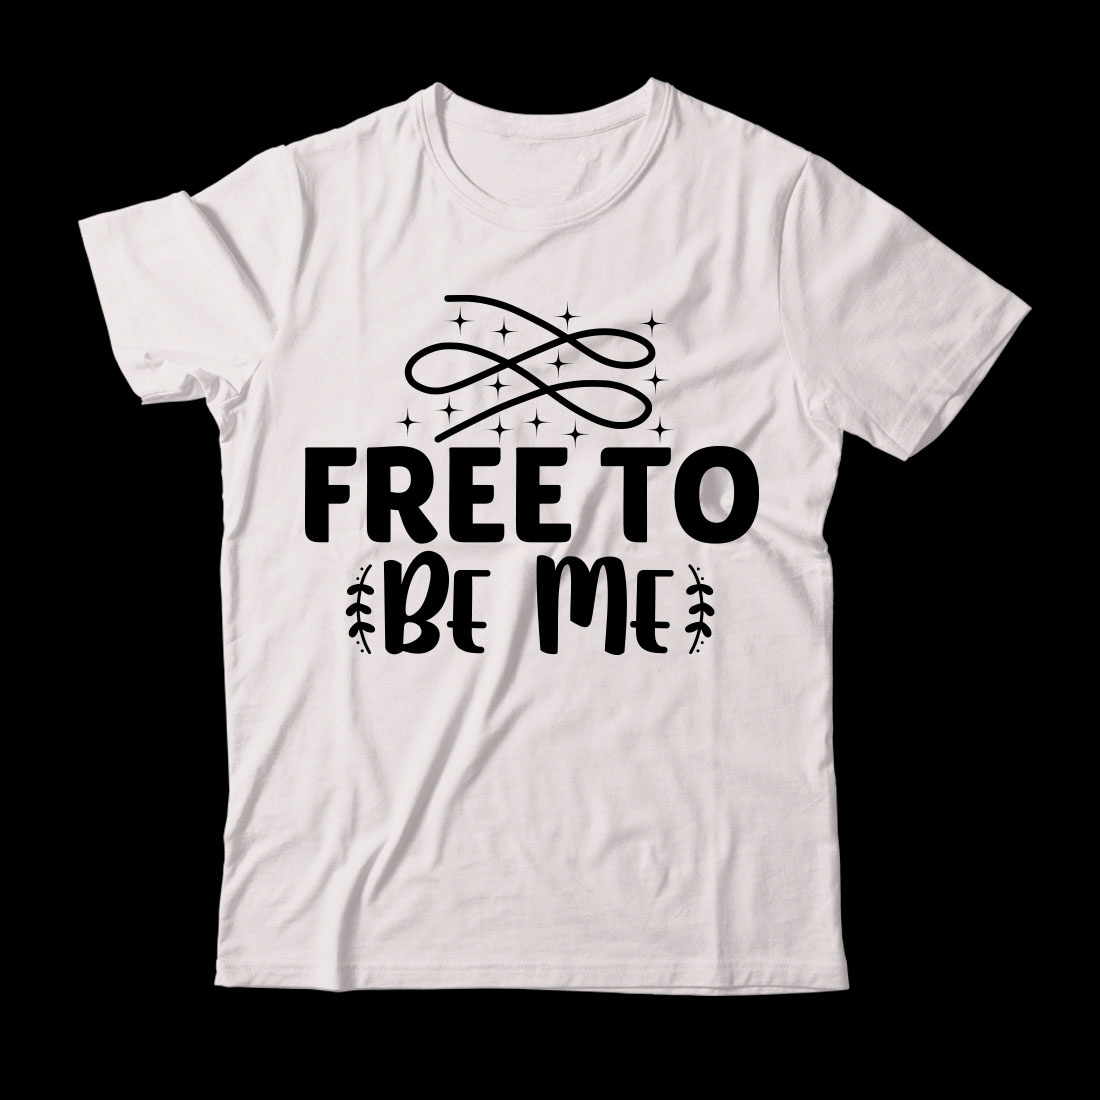 White t - shirt that says free to be me.